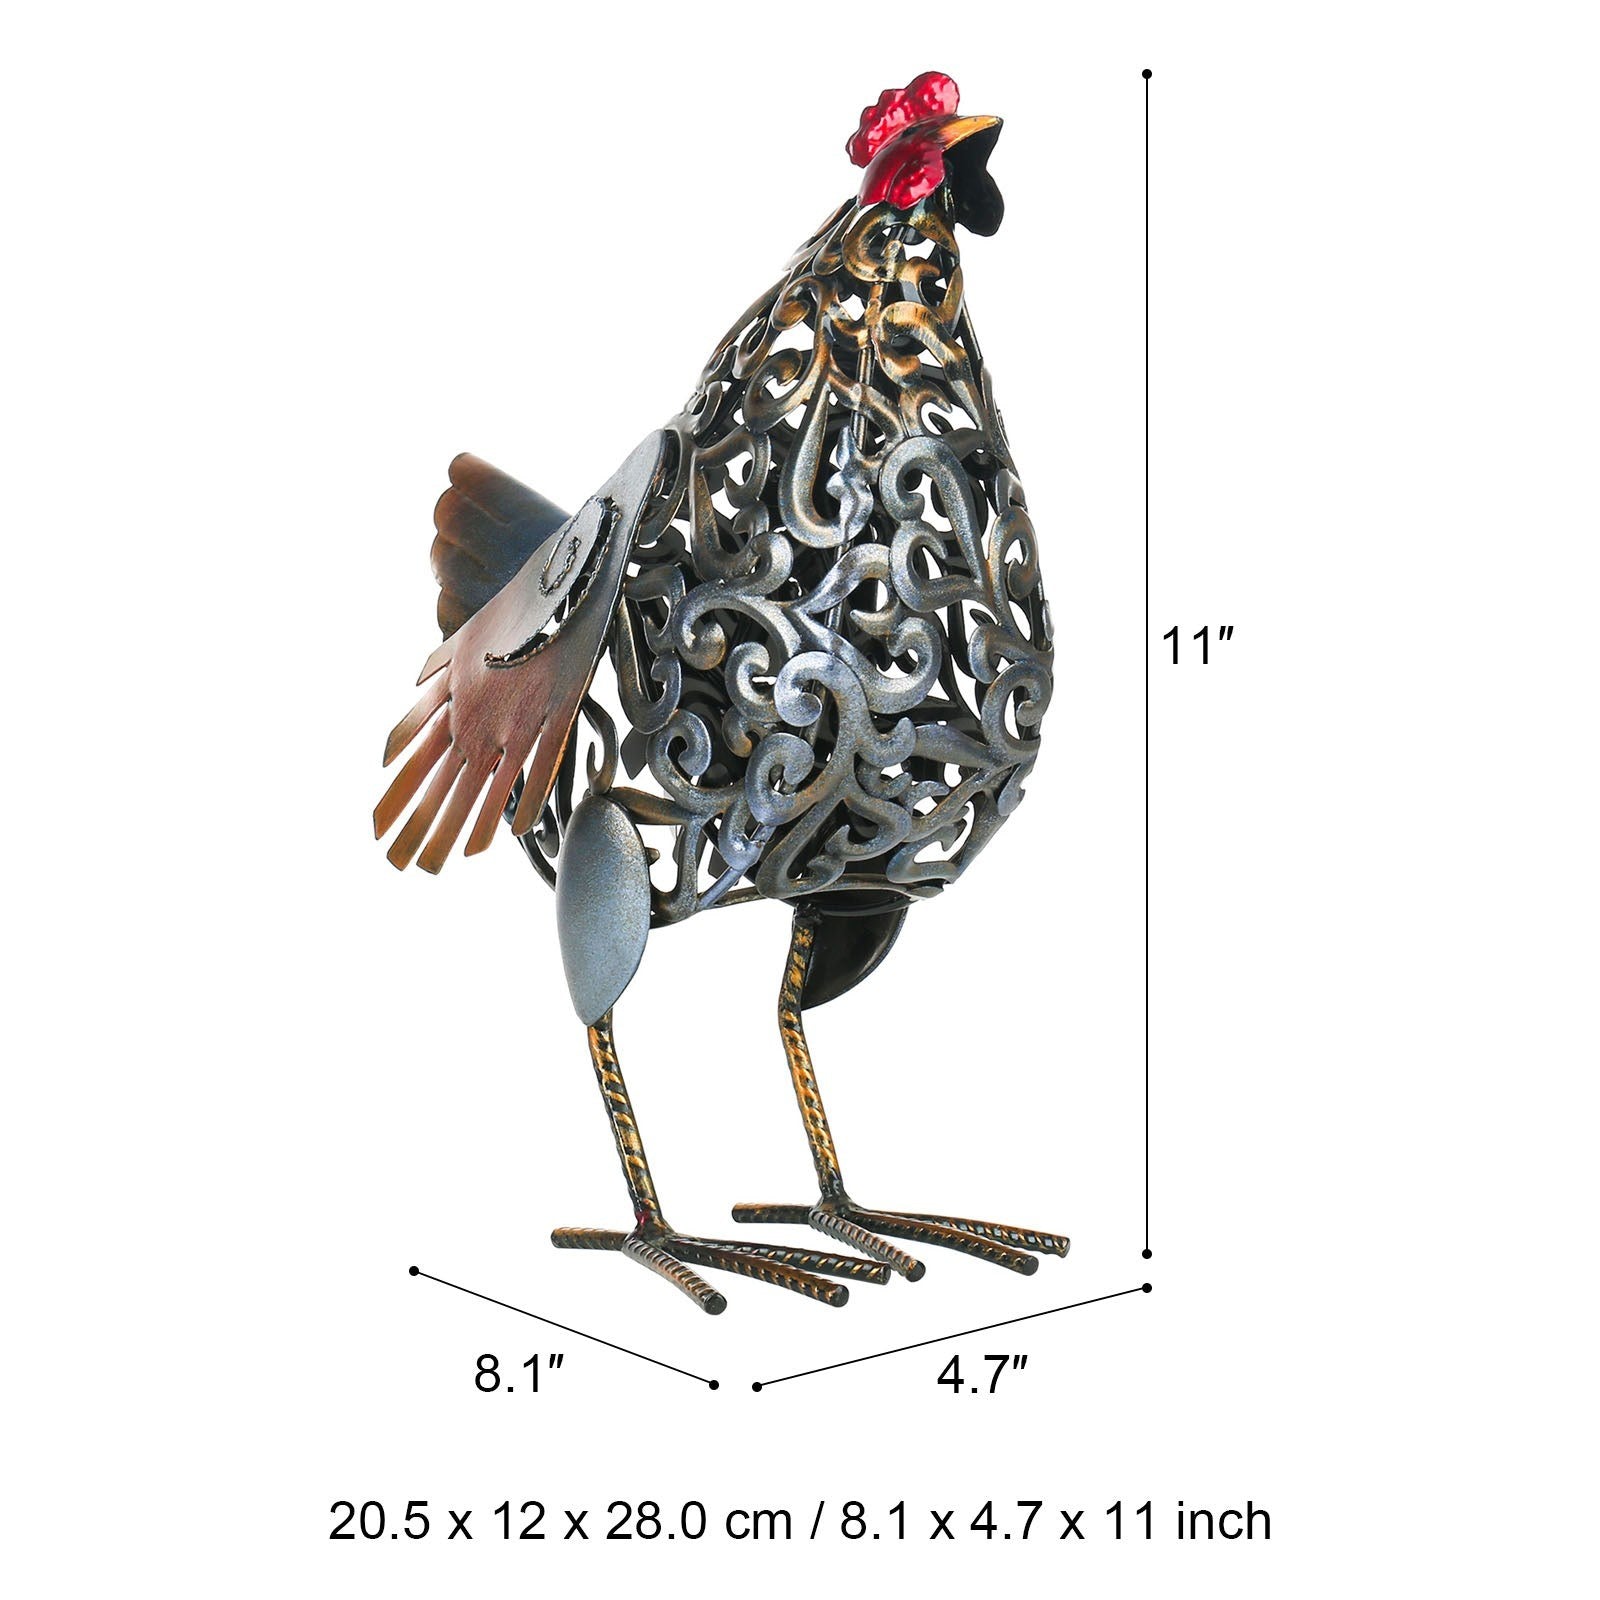 Our metal rooster sculpture is perfect for your garden or yard decor